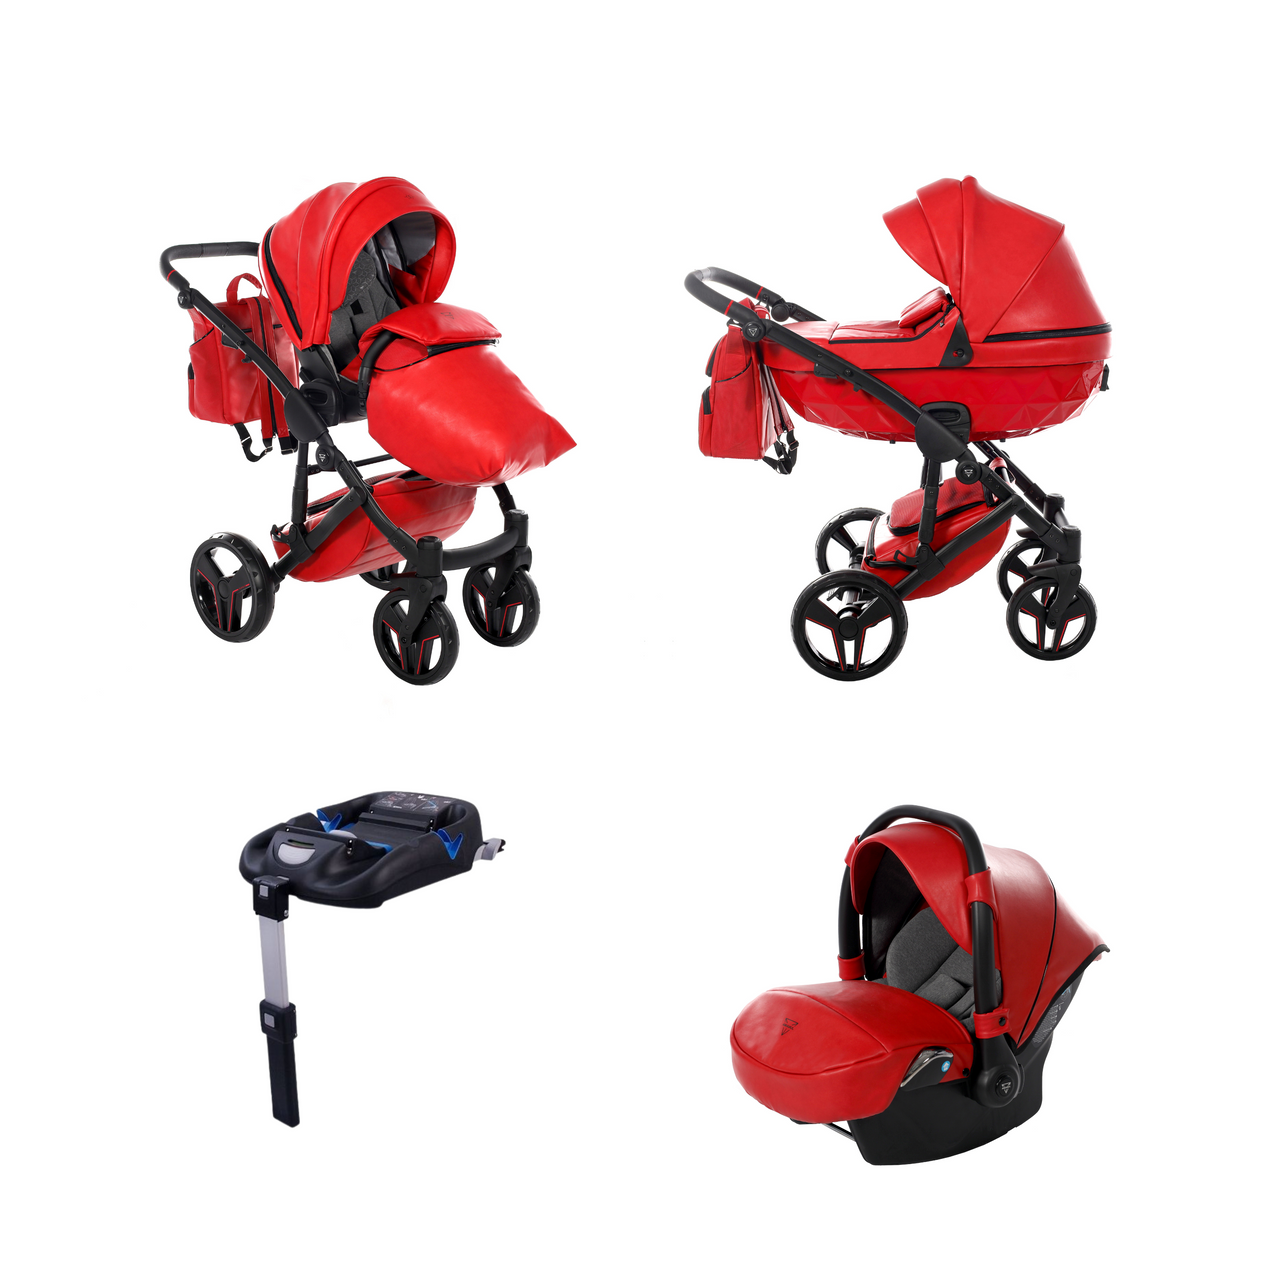 Junama S-Class 3 In 1 Travel System - Red - Yes | For Your Little One